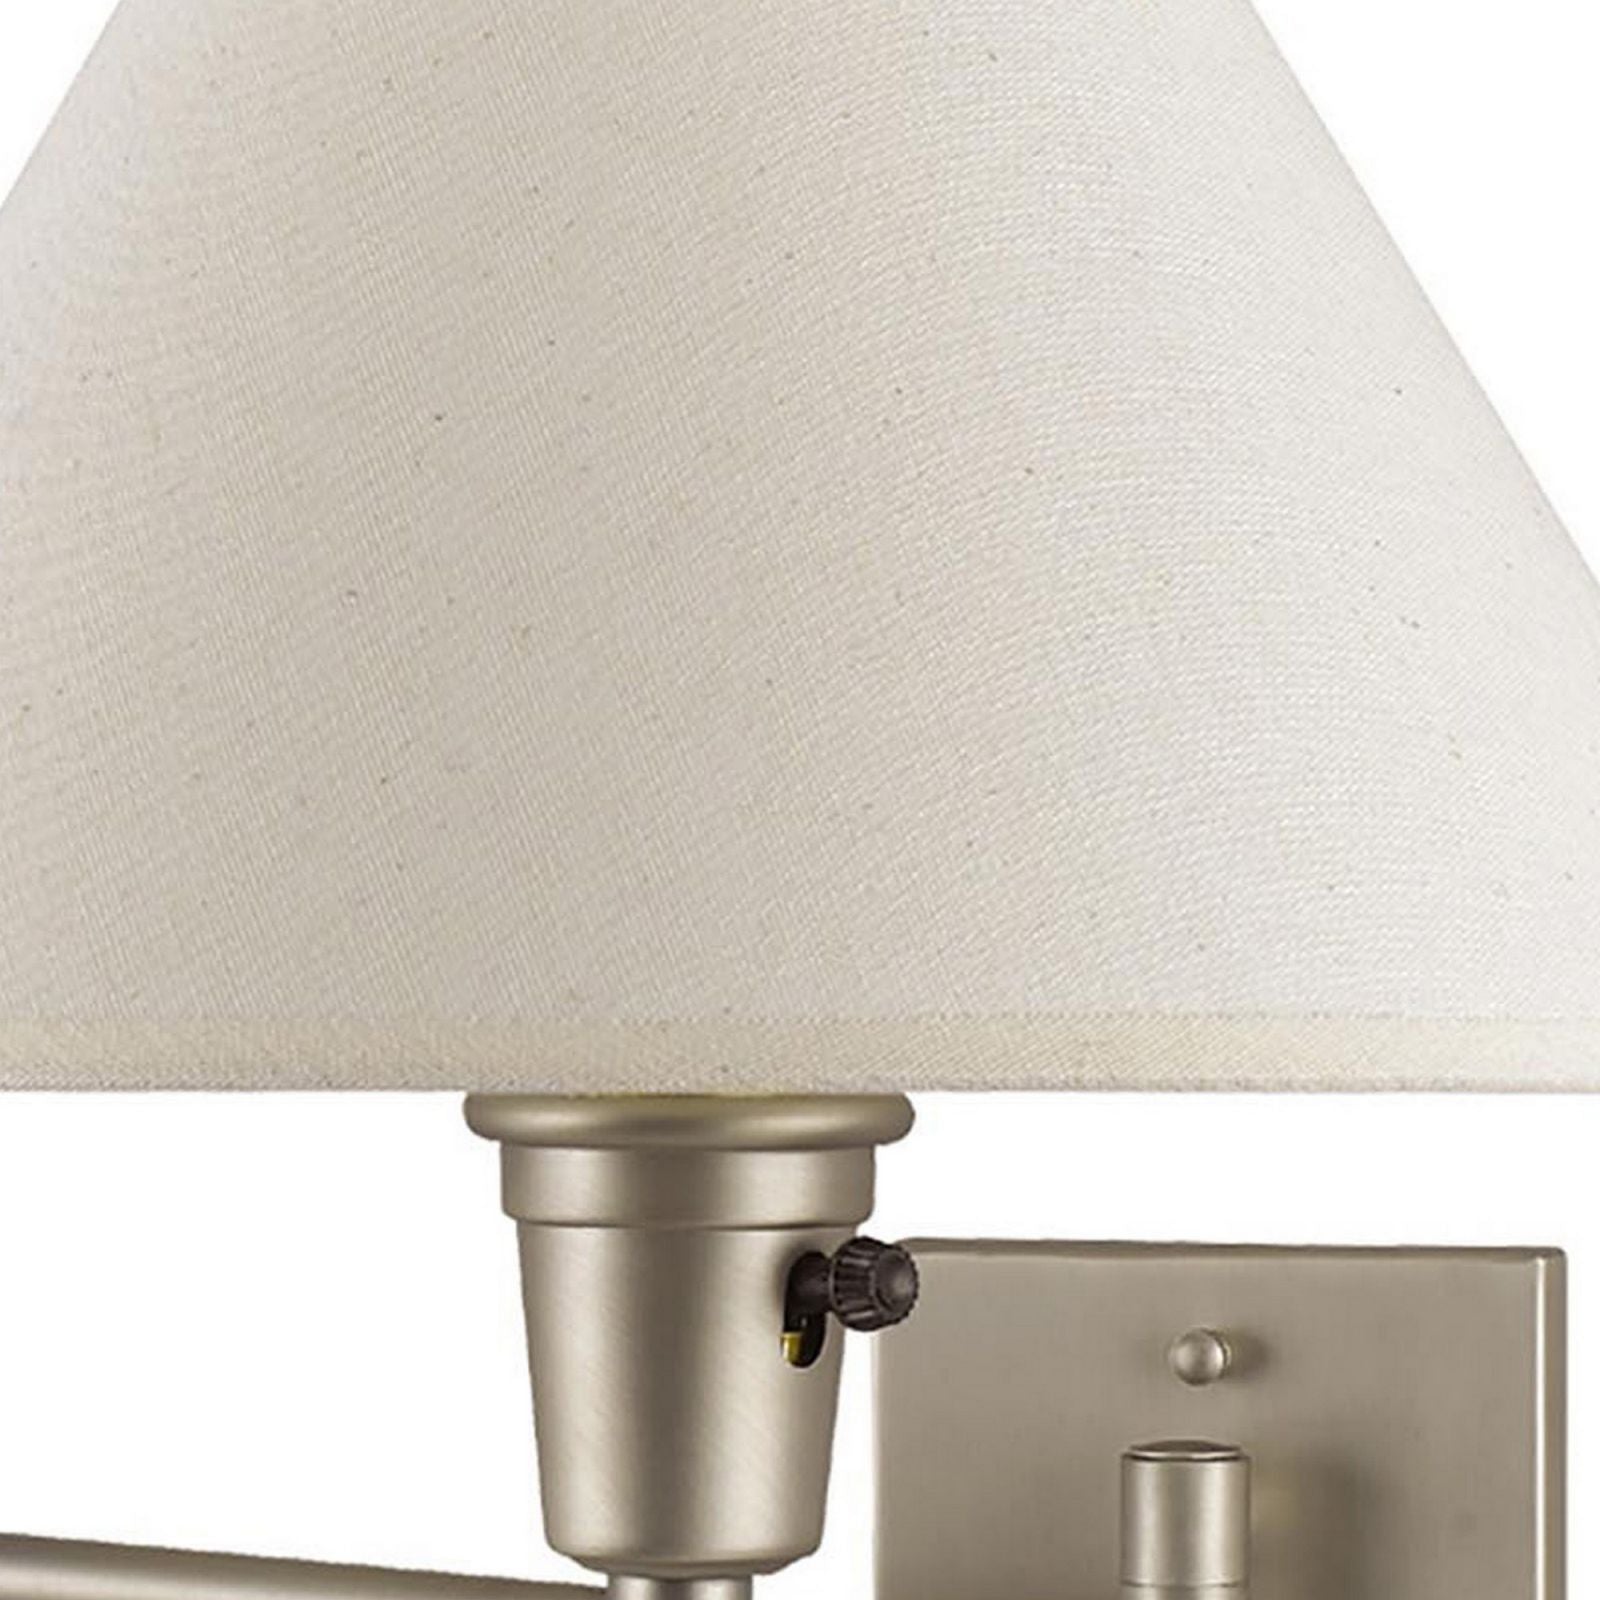 60 Watt Metal Swing Arm Wall Lamp With Tapered Shade, Off White And Silver By Benzara